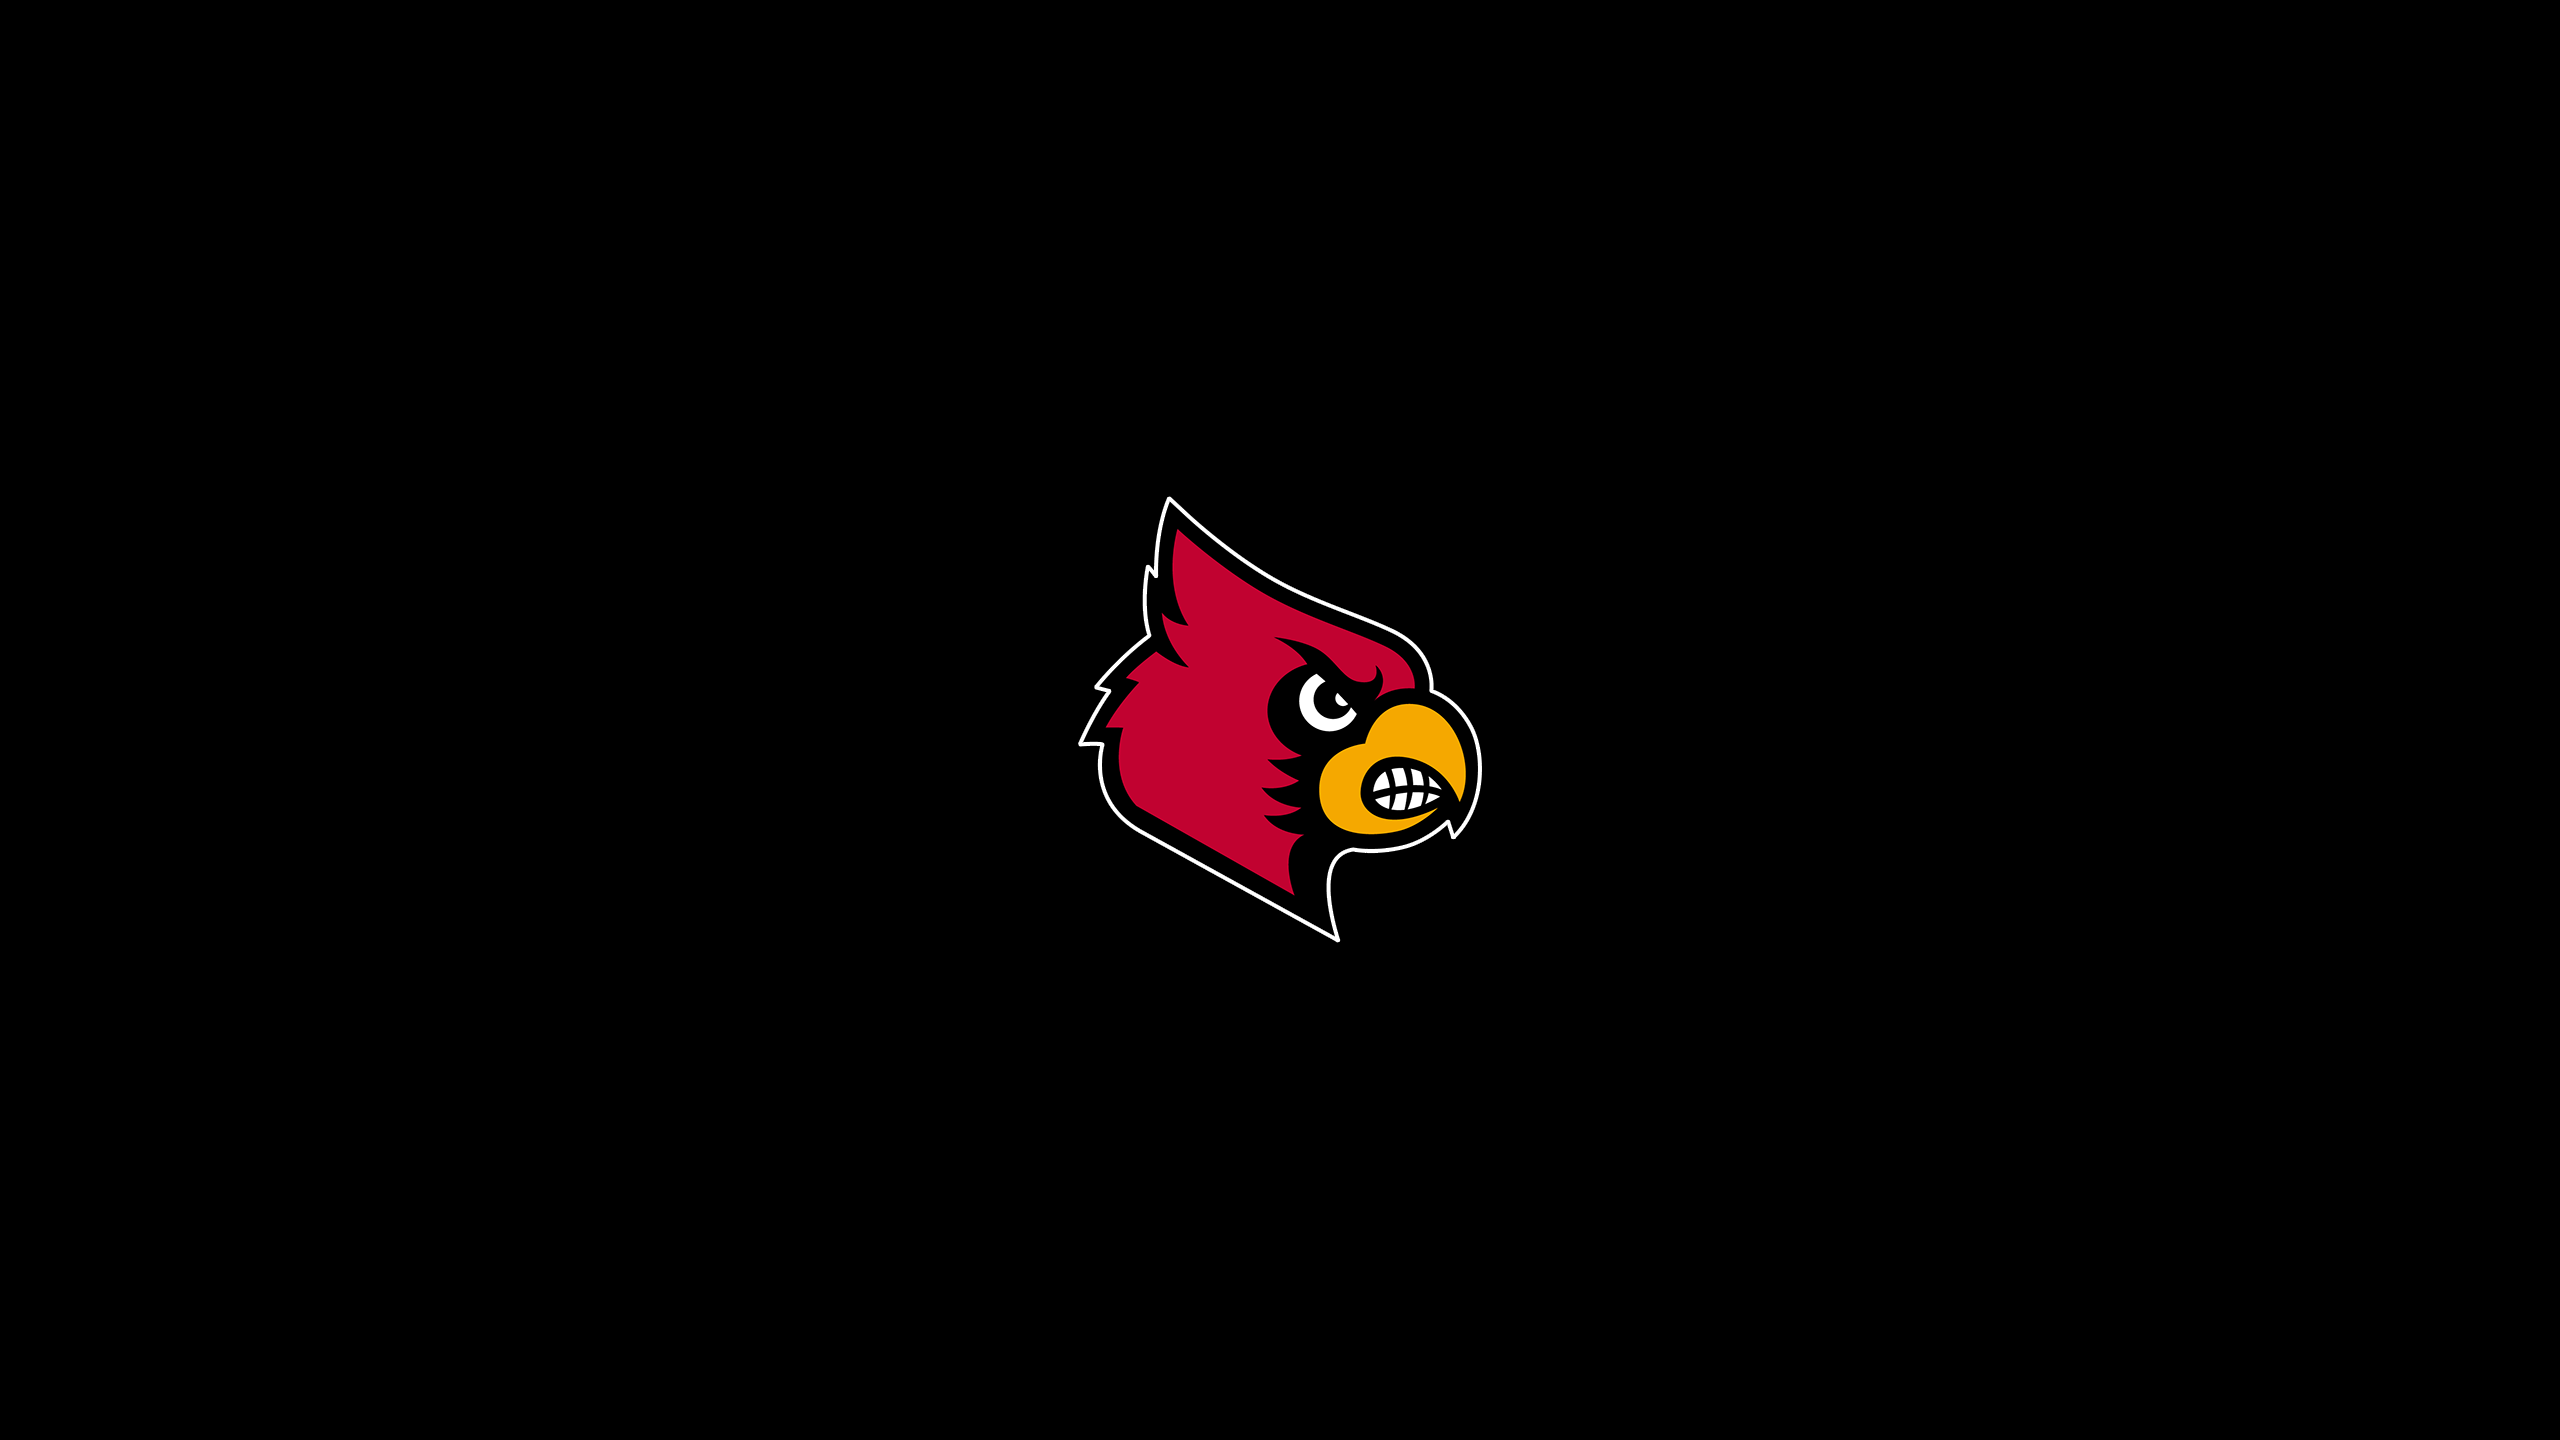 Louisville Cardinals Football - NCAAF - Square Bettor